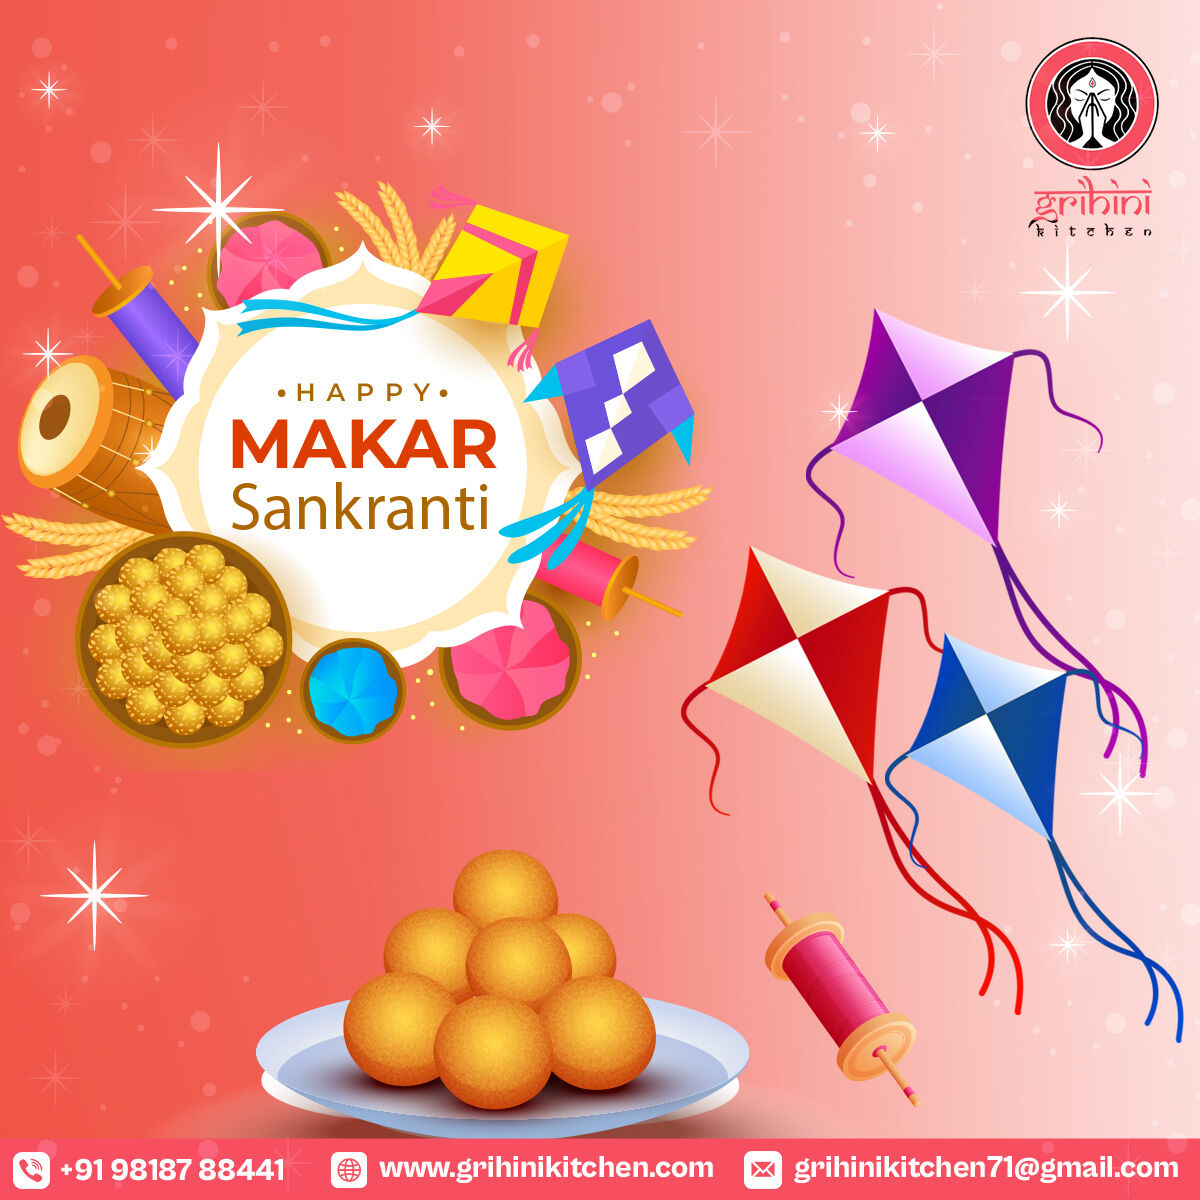 avoring the sweetness of Makar Sankranti with Grihini Kitchen! 🌾🪁 Here's to joy, warmth, and the simple pleasures of this beautiful festival. Happy Makar Sankranti! 💛 #GrihiniCelebrates #MakarSankrantiJoy #FestivalMoments #KiteFlyingFun #WarmWishes #SimpleJoys #SankrantiSmiles